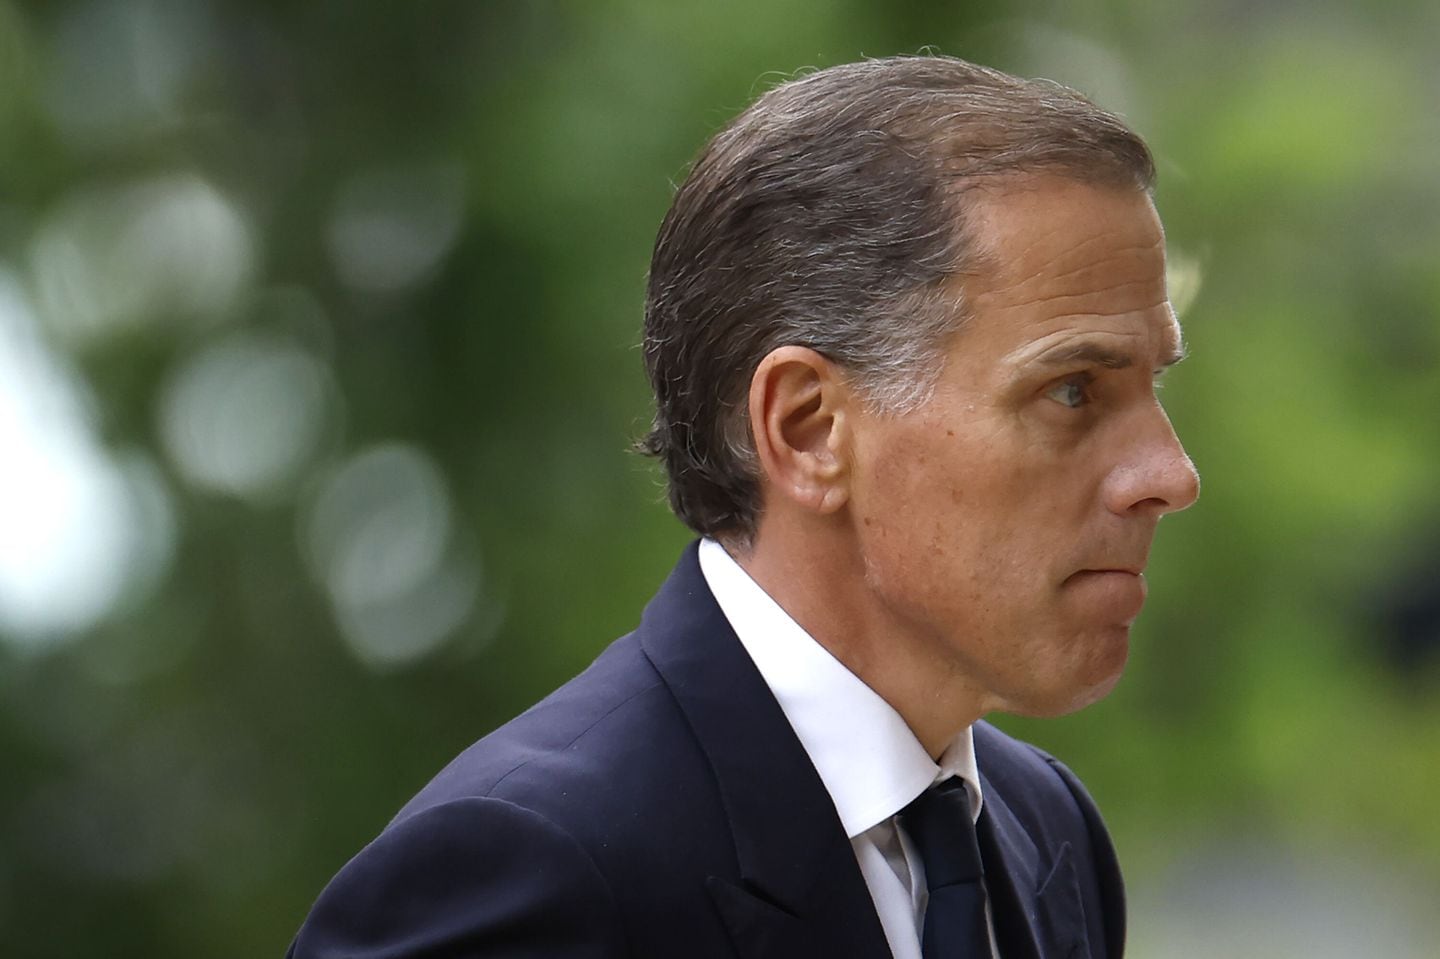 Hunter Biden arrived at the J. Caleb Boggs Federal Building in Wilmington, Del., on June 6.